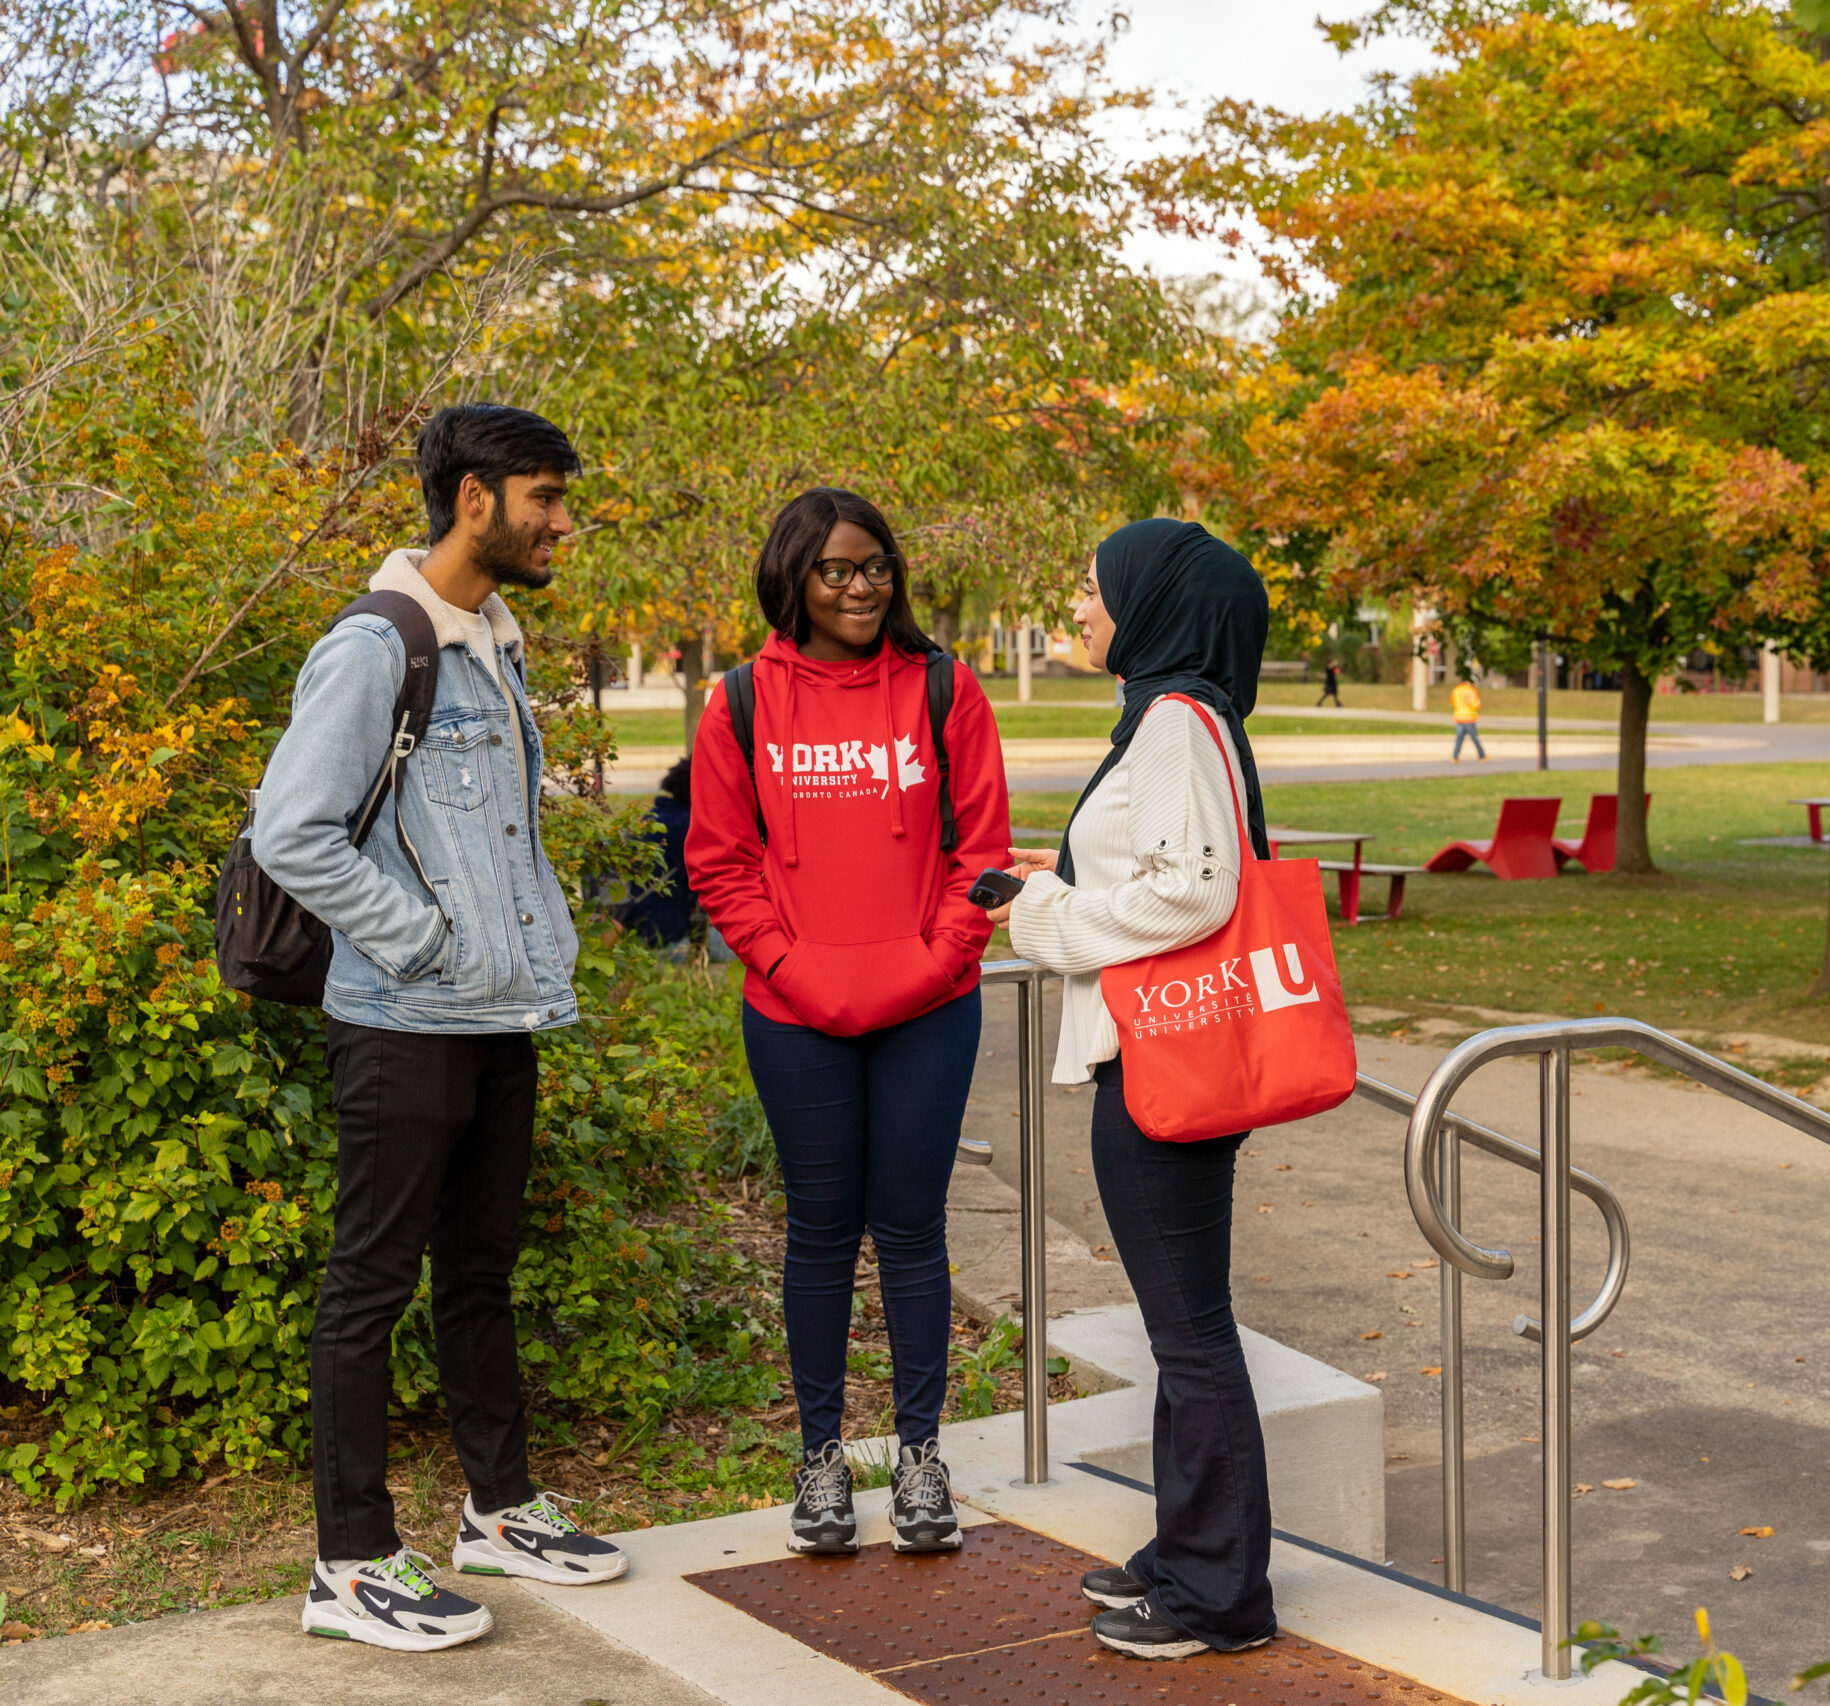 Three students speaking happily with each other next to a garden.